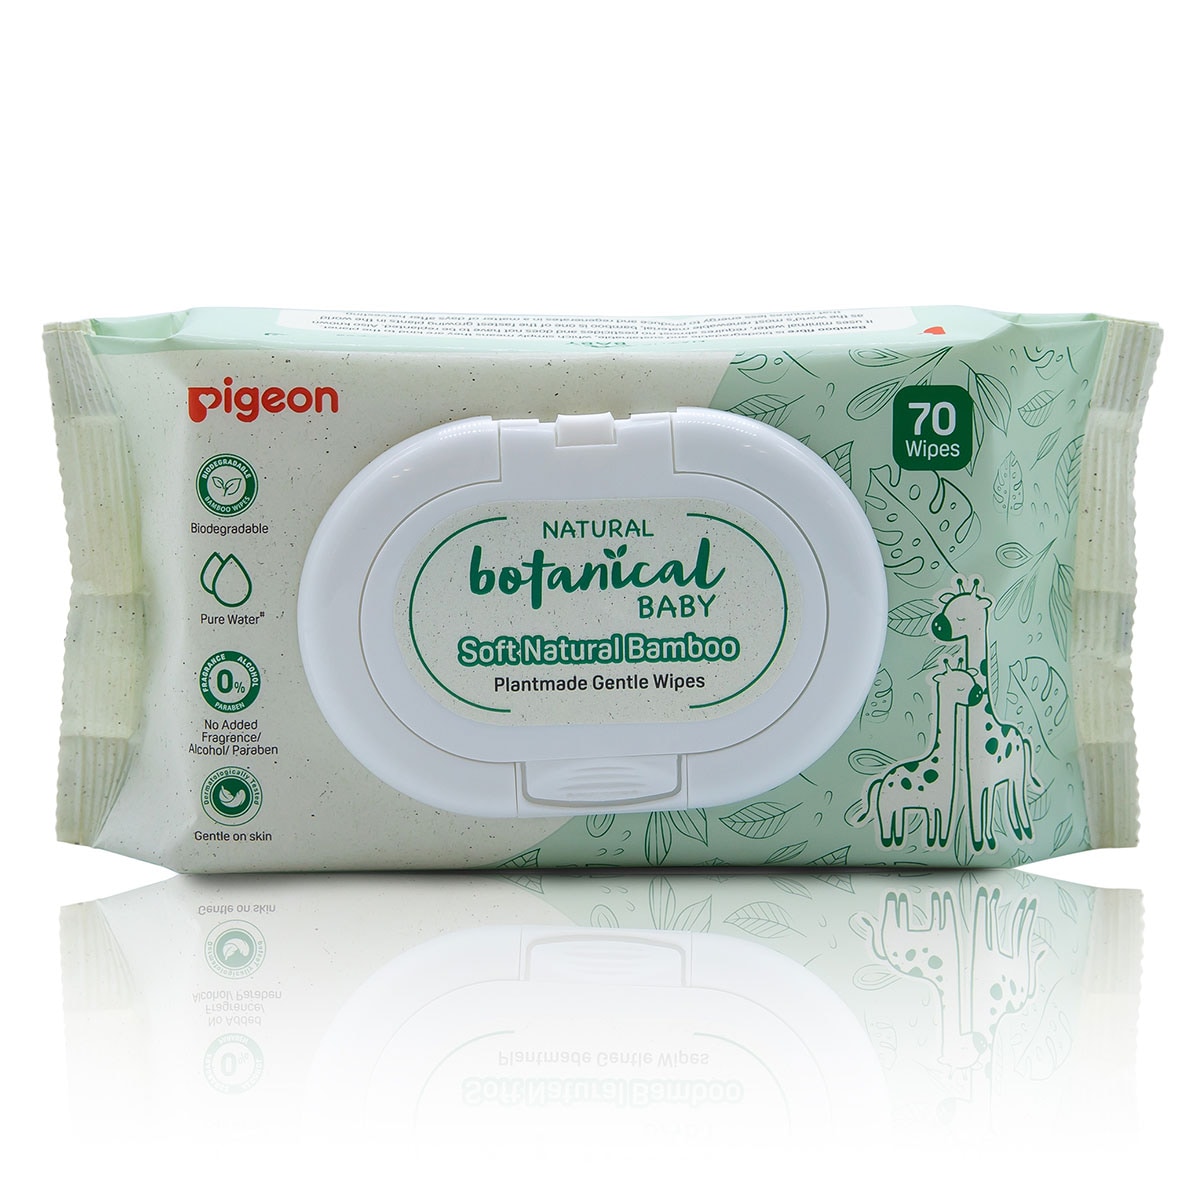 Pigeon Natural Botanical Baby Gentle Wipes 70 Pack